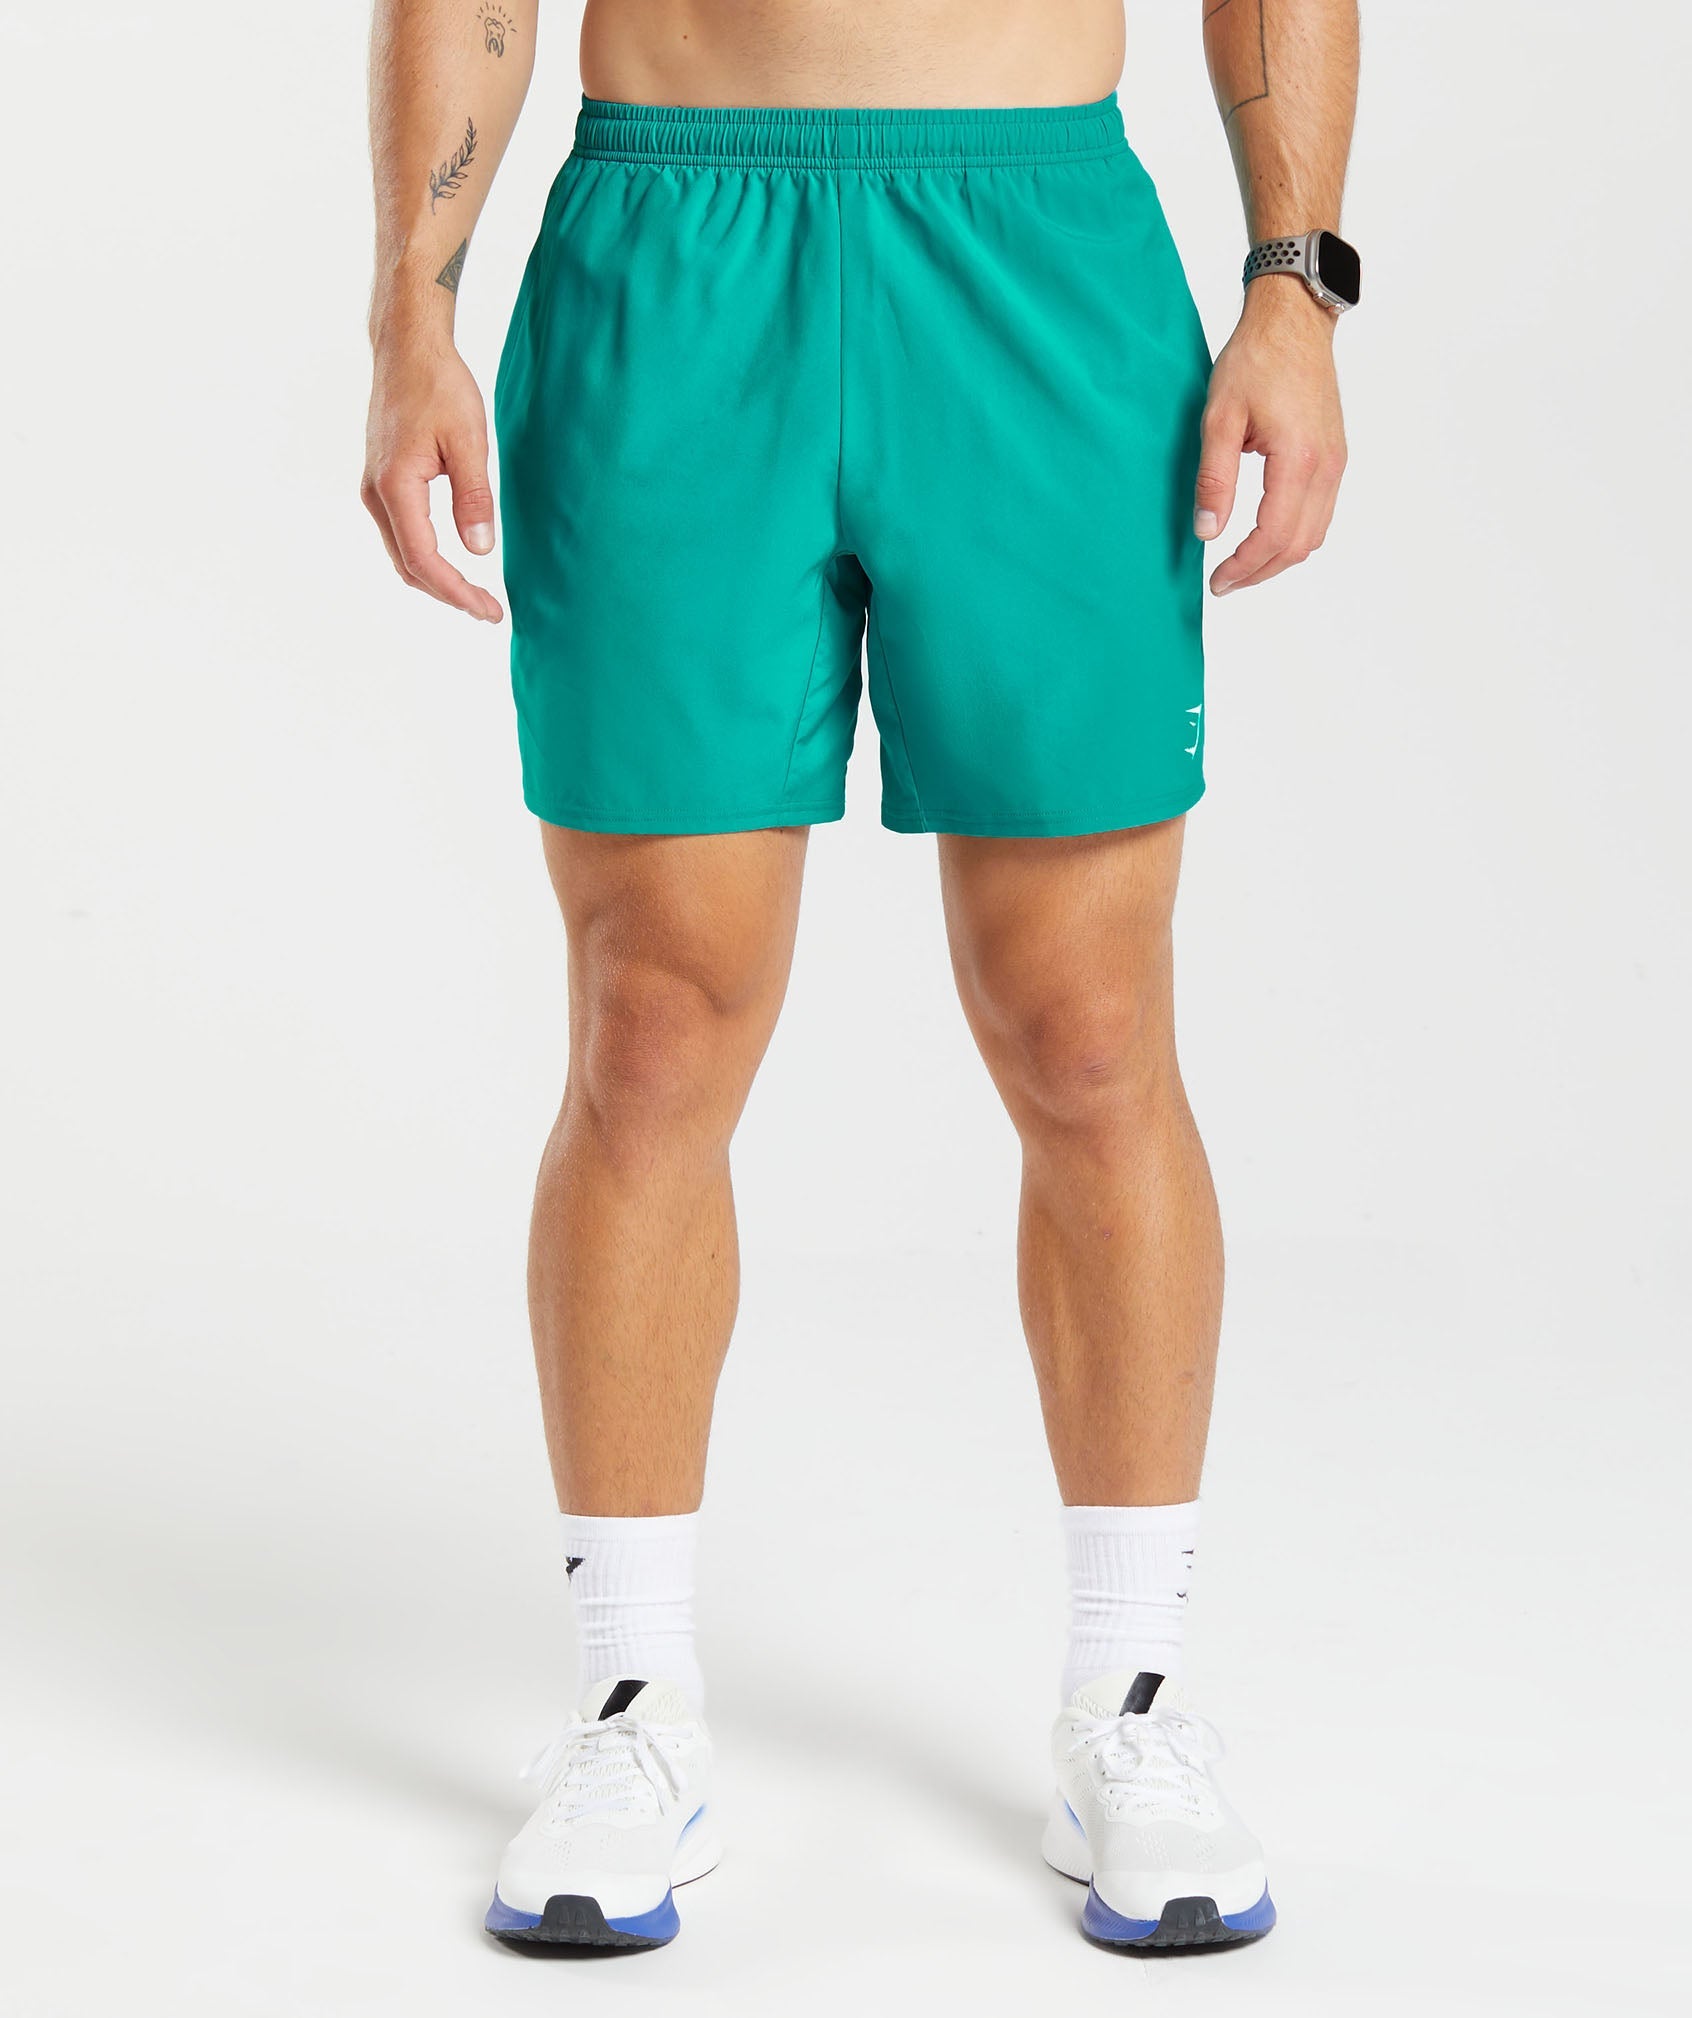 Arrival 7" Shorts in Seafoam Blue is out of stock